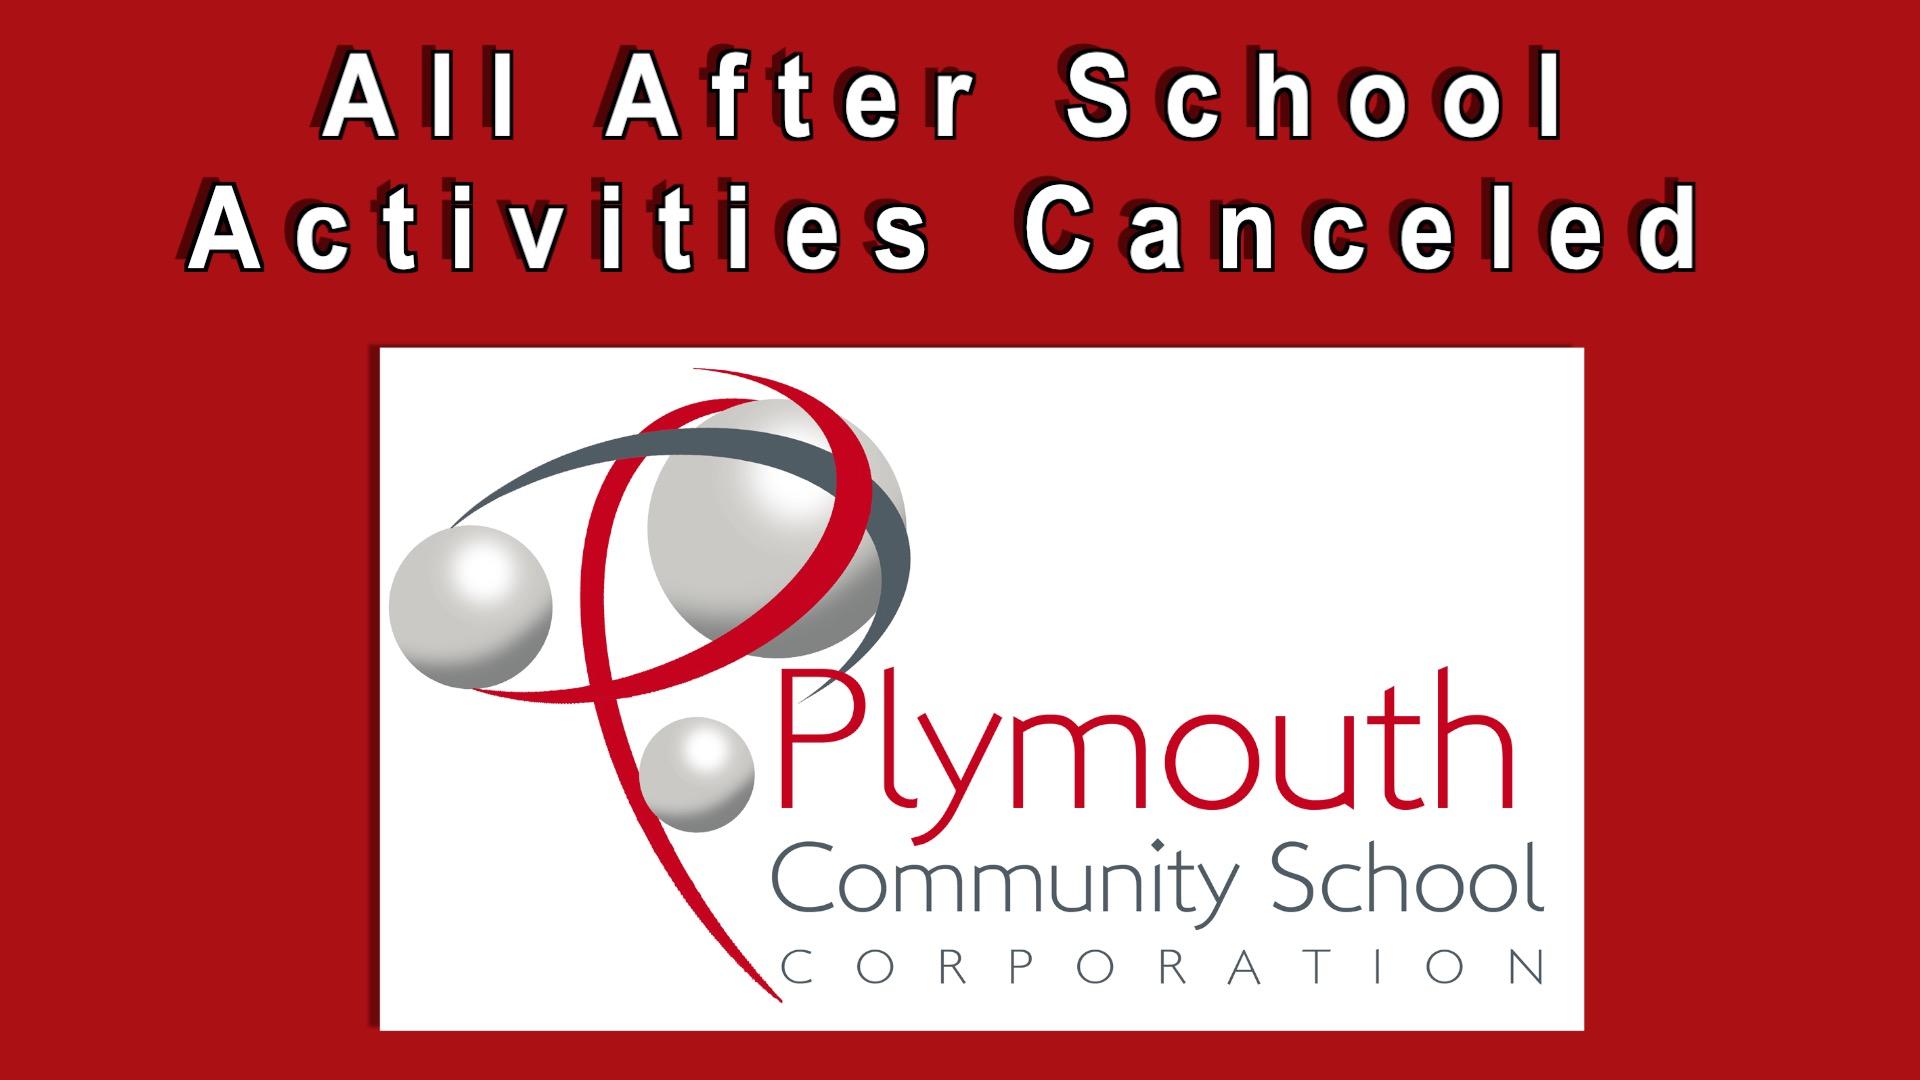 All After School Activities Canceled for Plymouth Community School Corporation